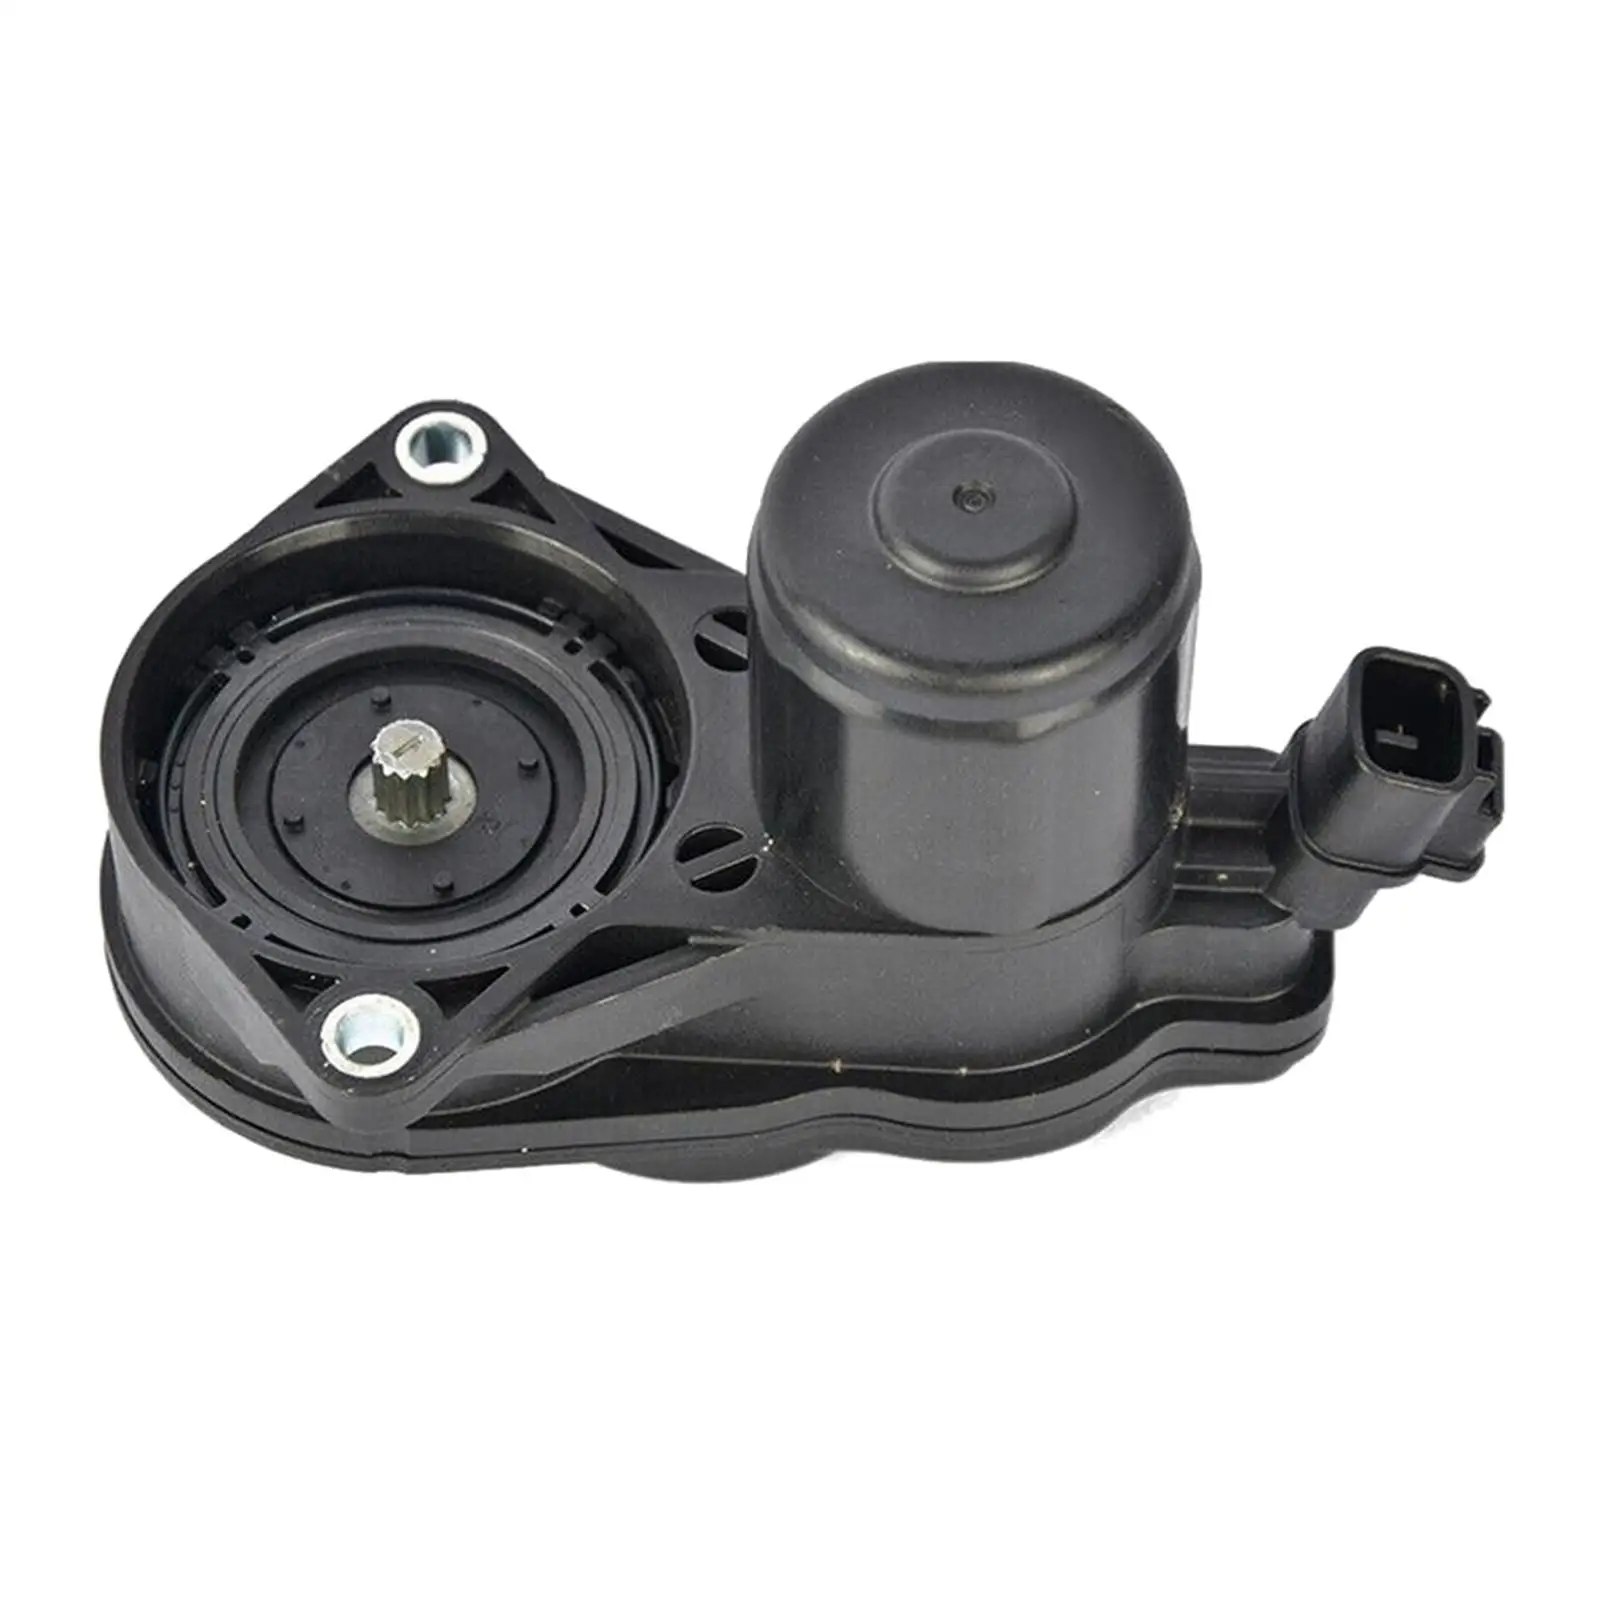 Parking Brake Actuator Assembly Car Accessories for Toyota for sienna